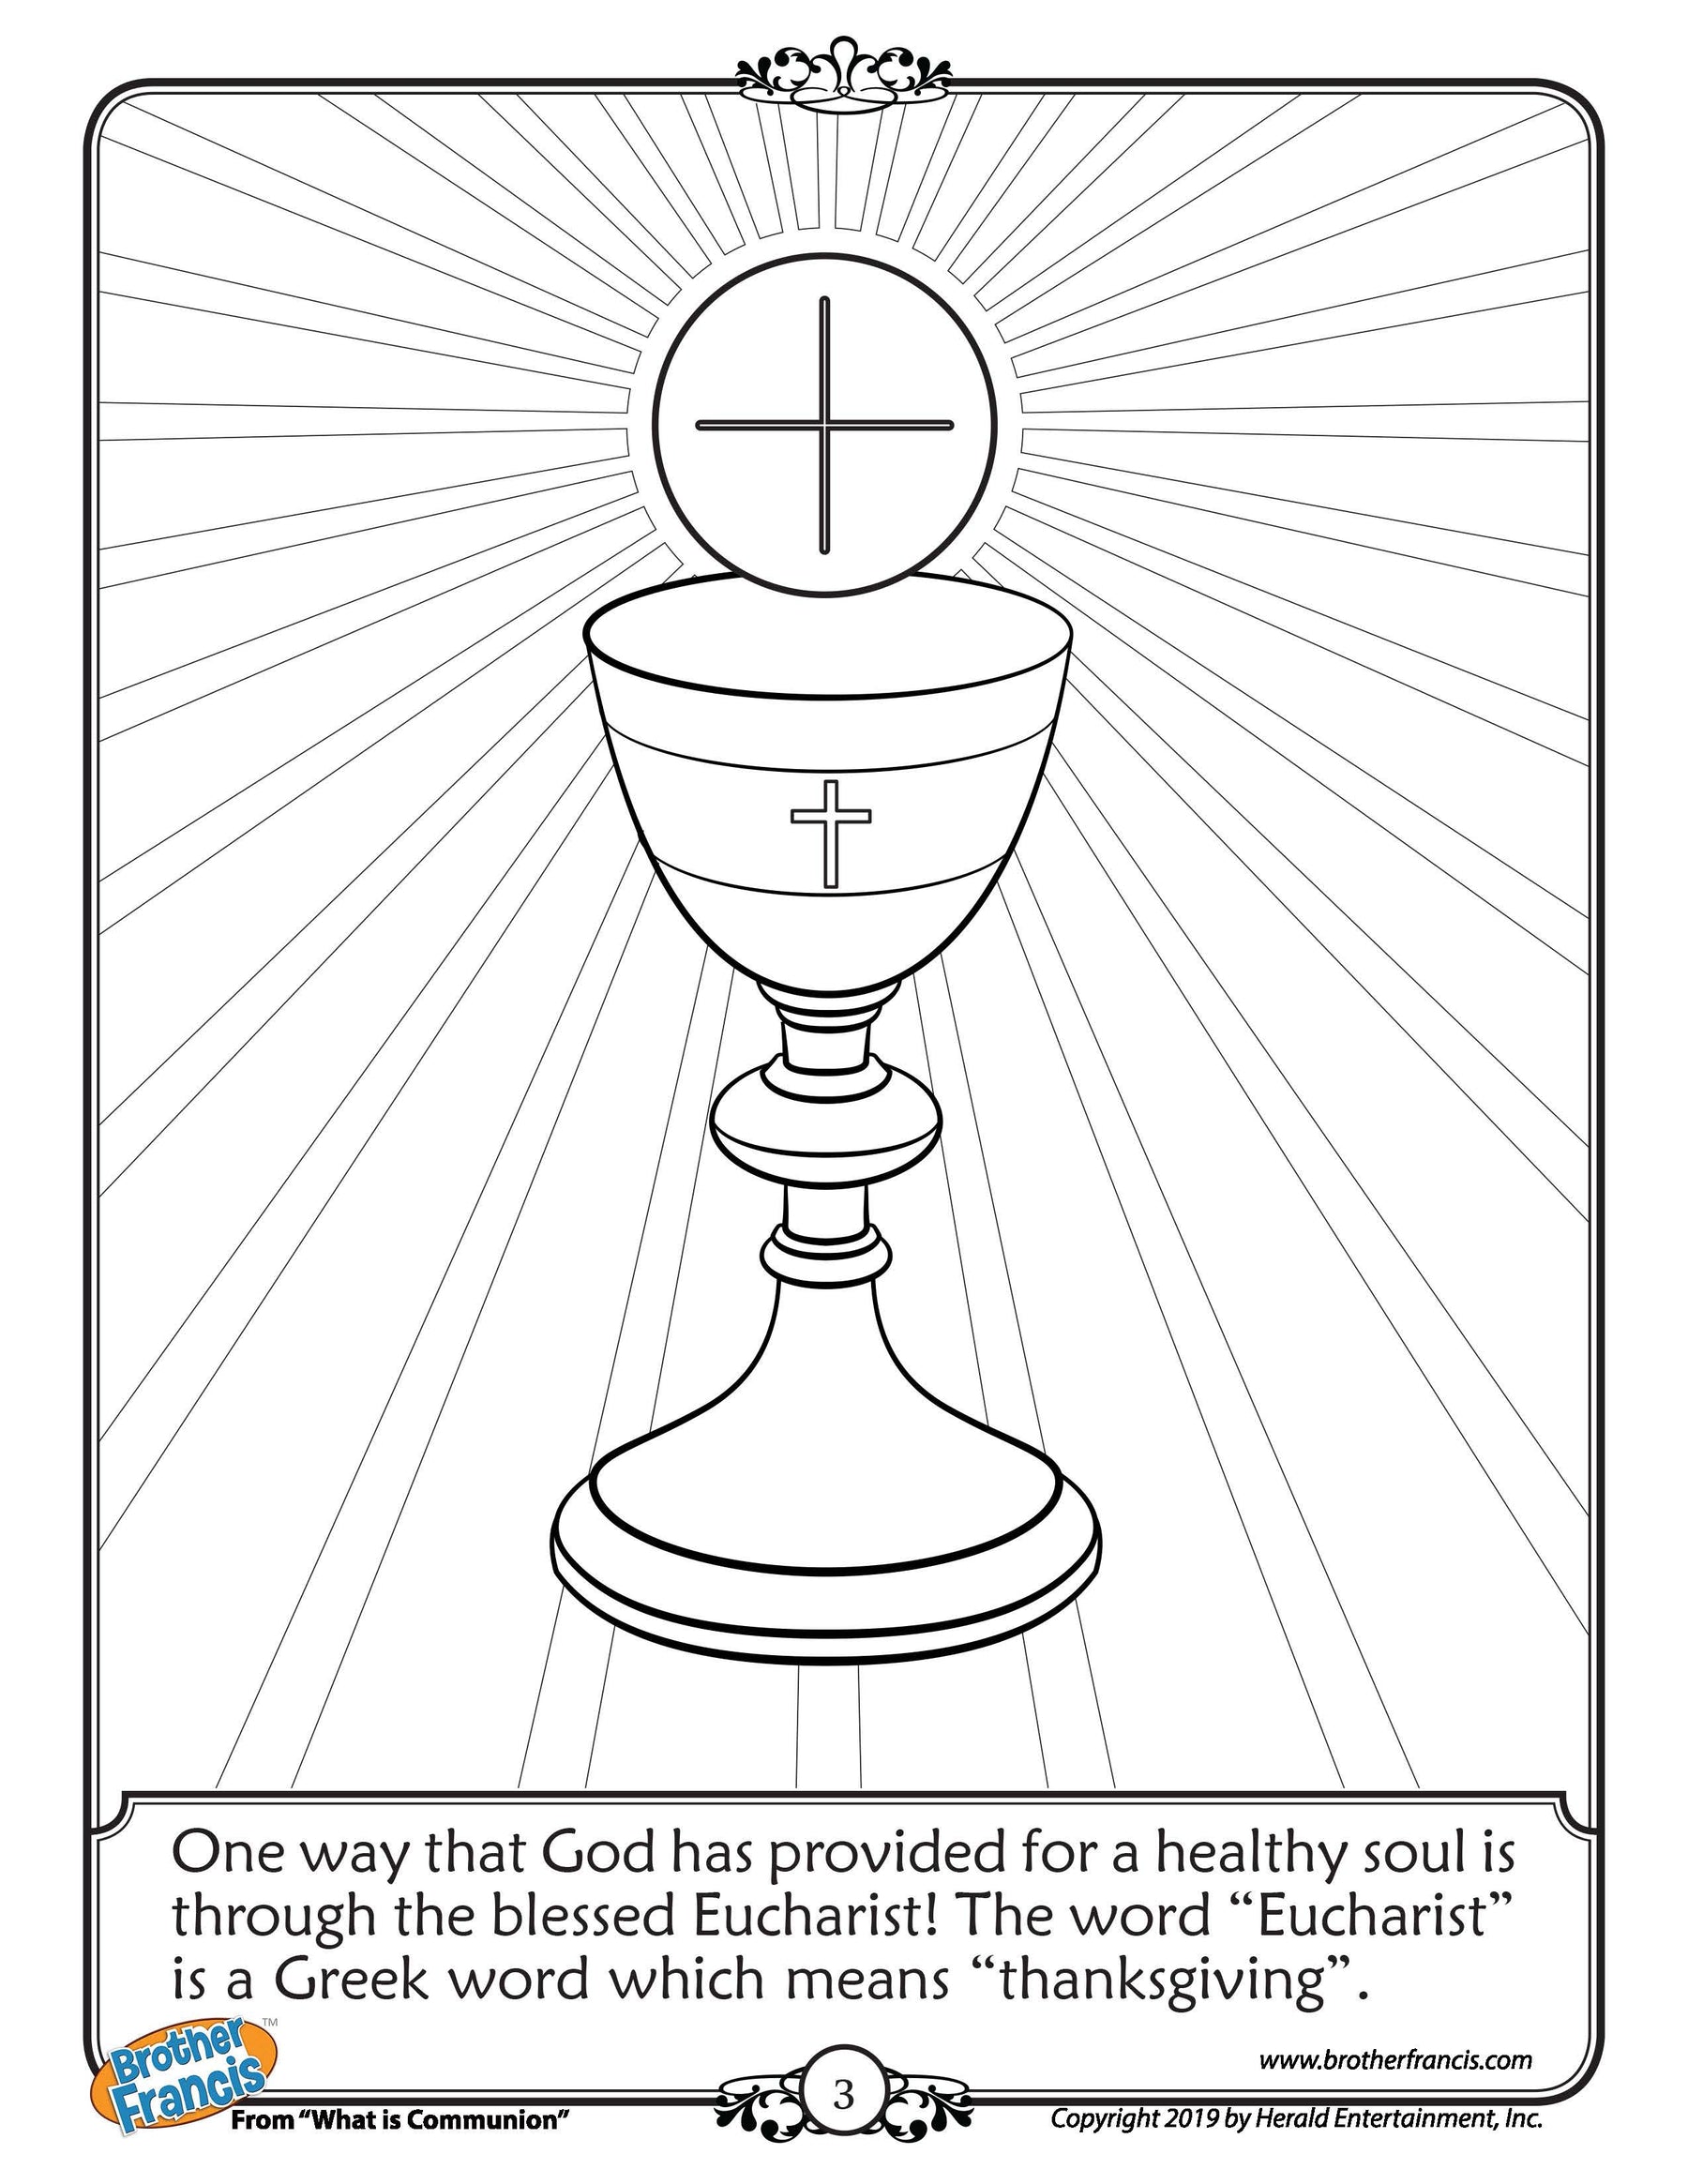 Download and Print - The Eucharist Coloring Page